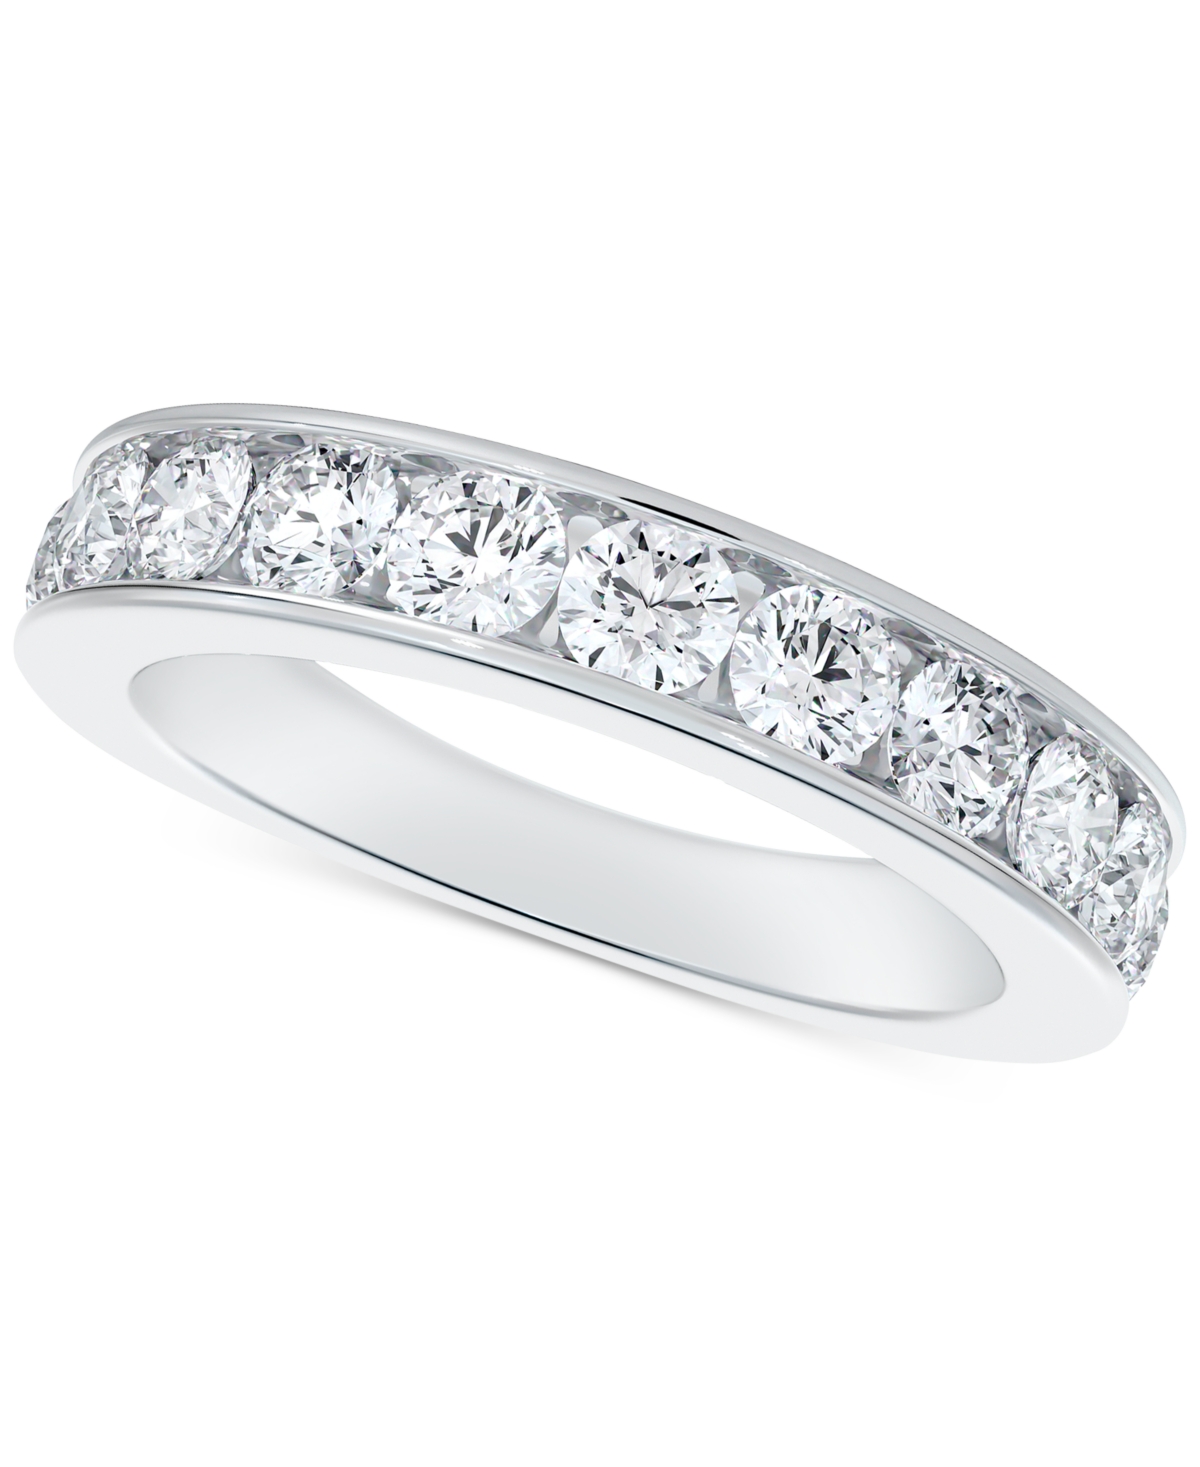 Portfolio by De Beers Forevermark Diamond Channel Set Band (1/2 ct. t.w.) in 14k White Gold - White Gold